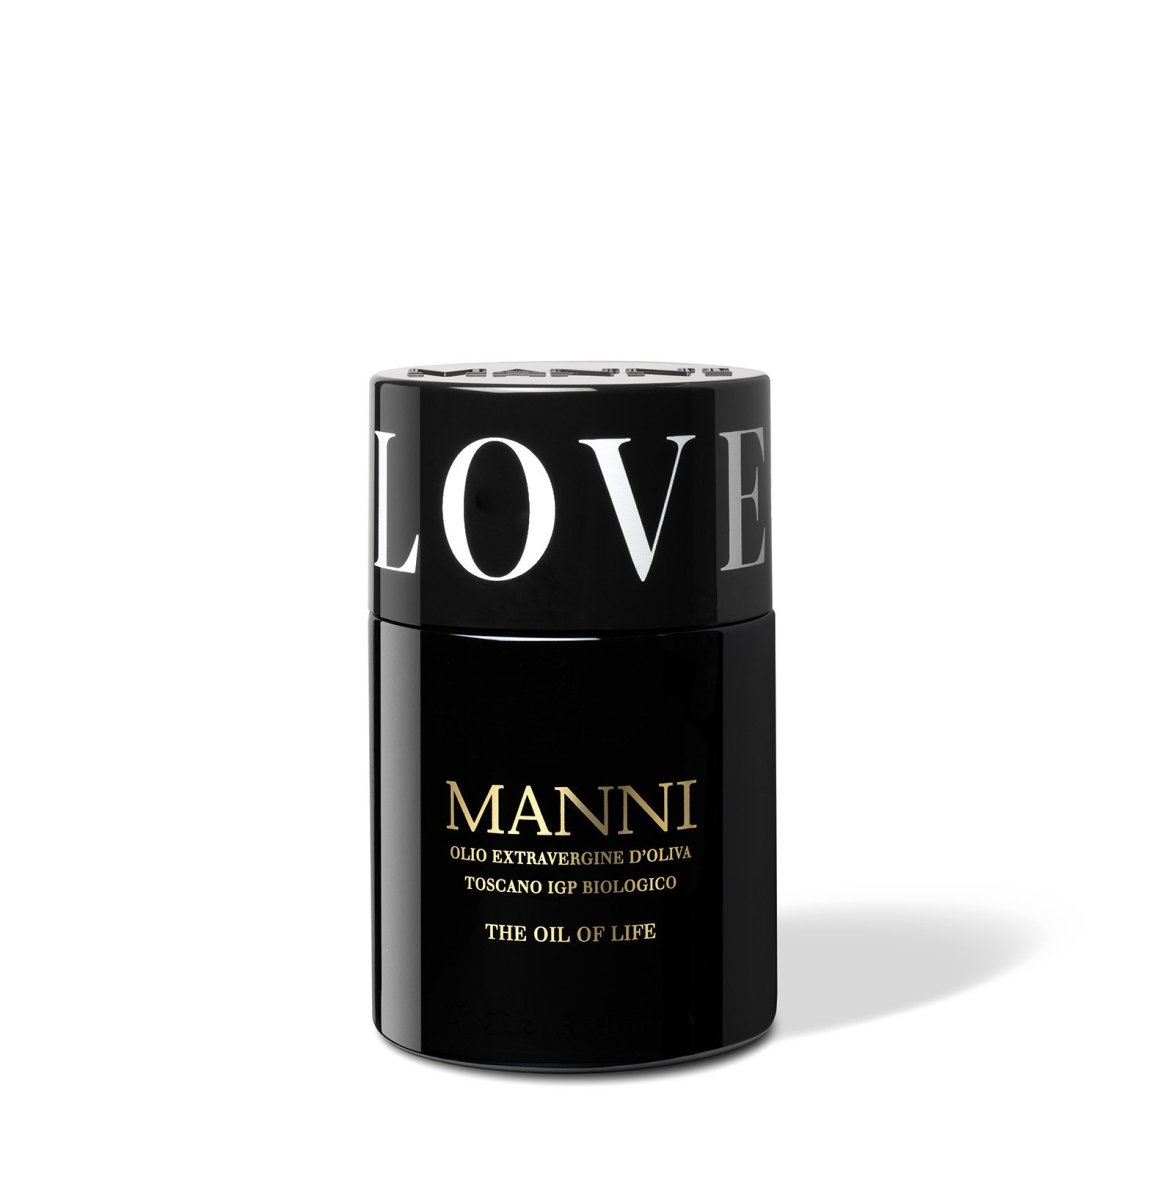 Manni Oil, Oil of Life, Extra Virgin Olive Oil Love Edition